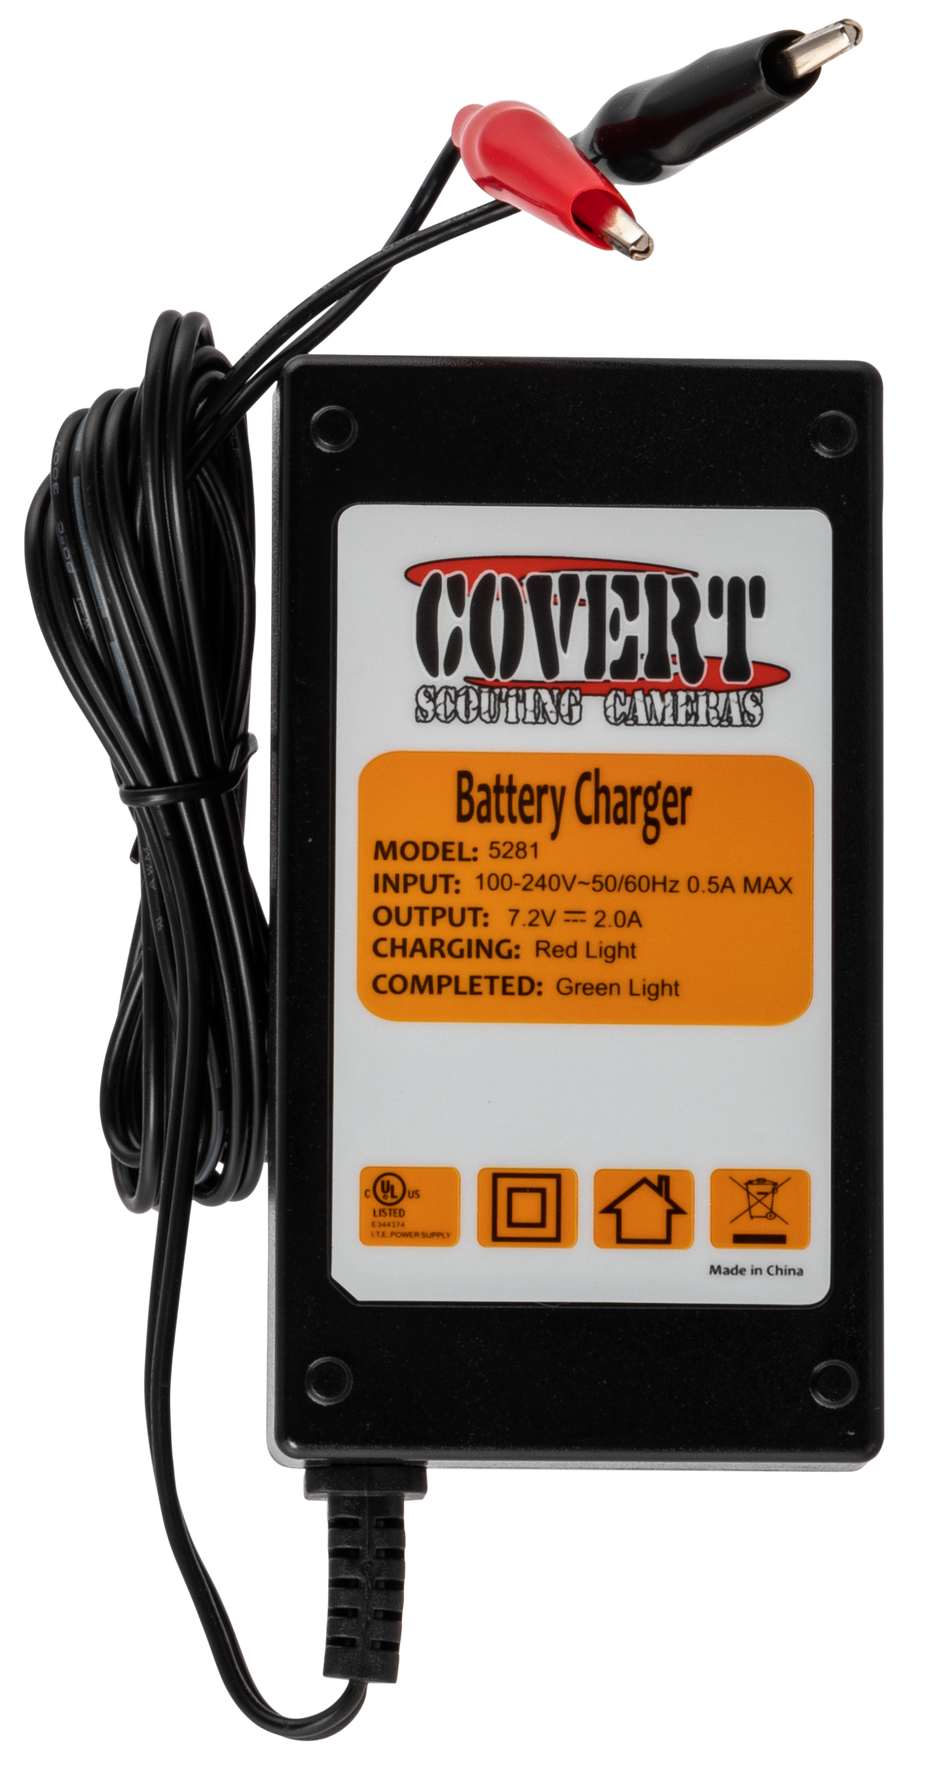 Covert Scouting Cameras Lifepo4 Wall Charger, Covert 5298 Lifepo4 110v Wall Charger